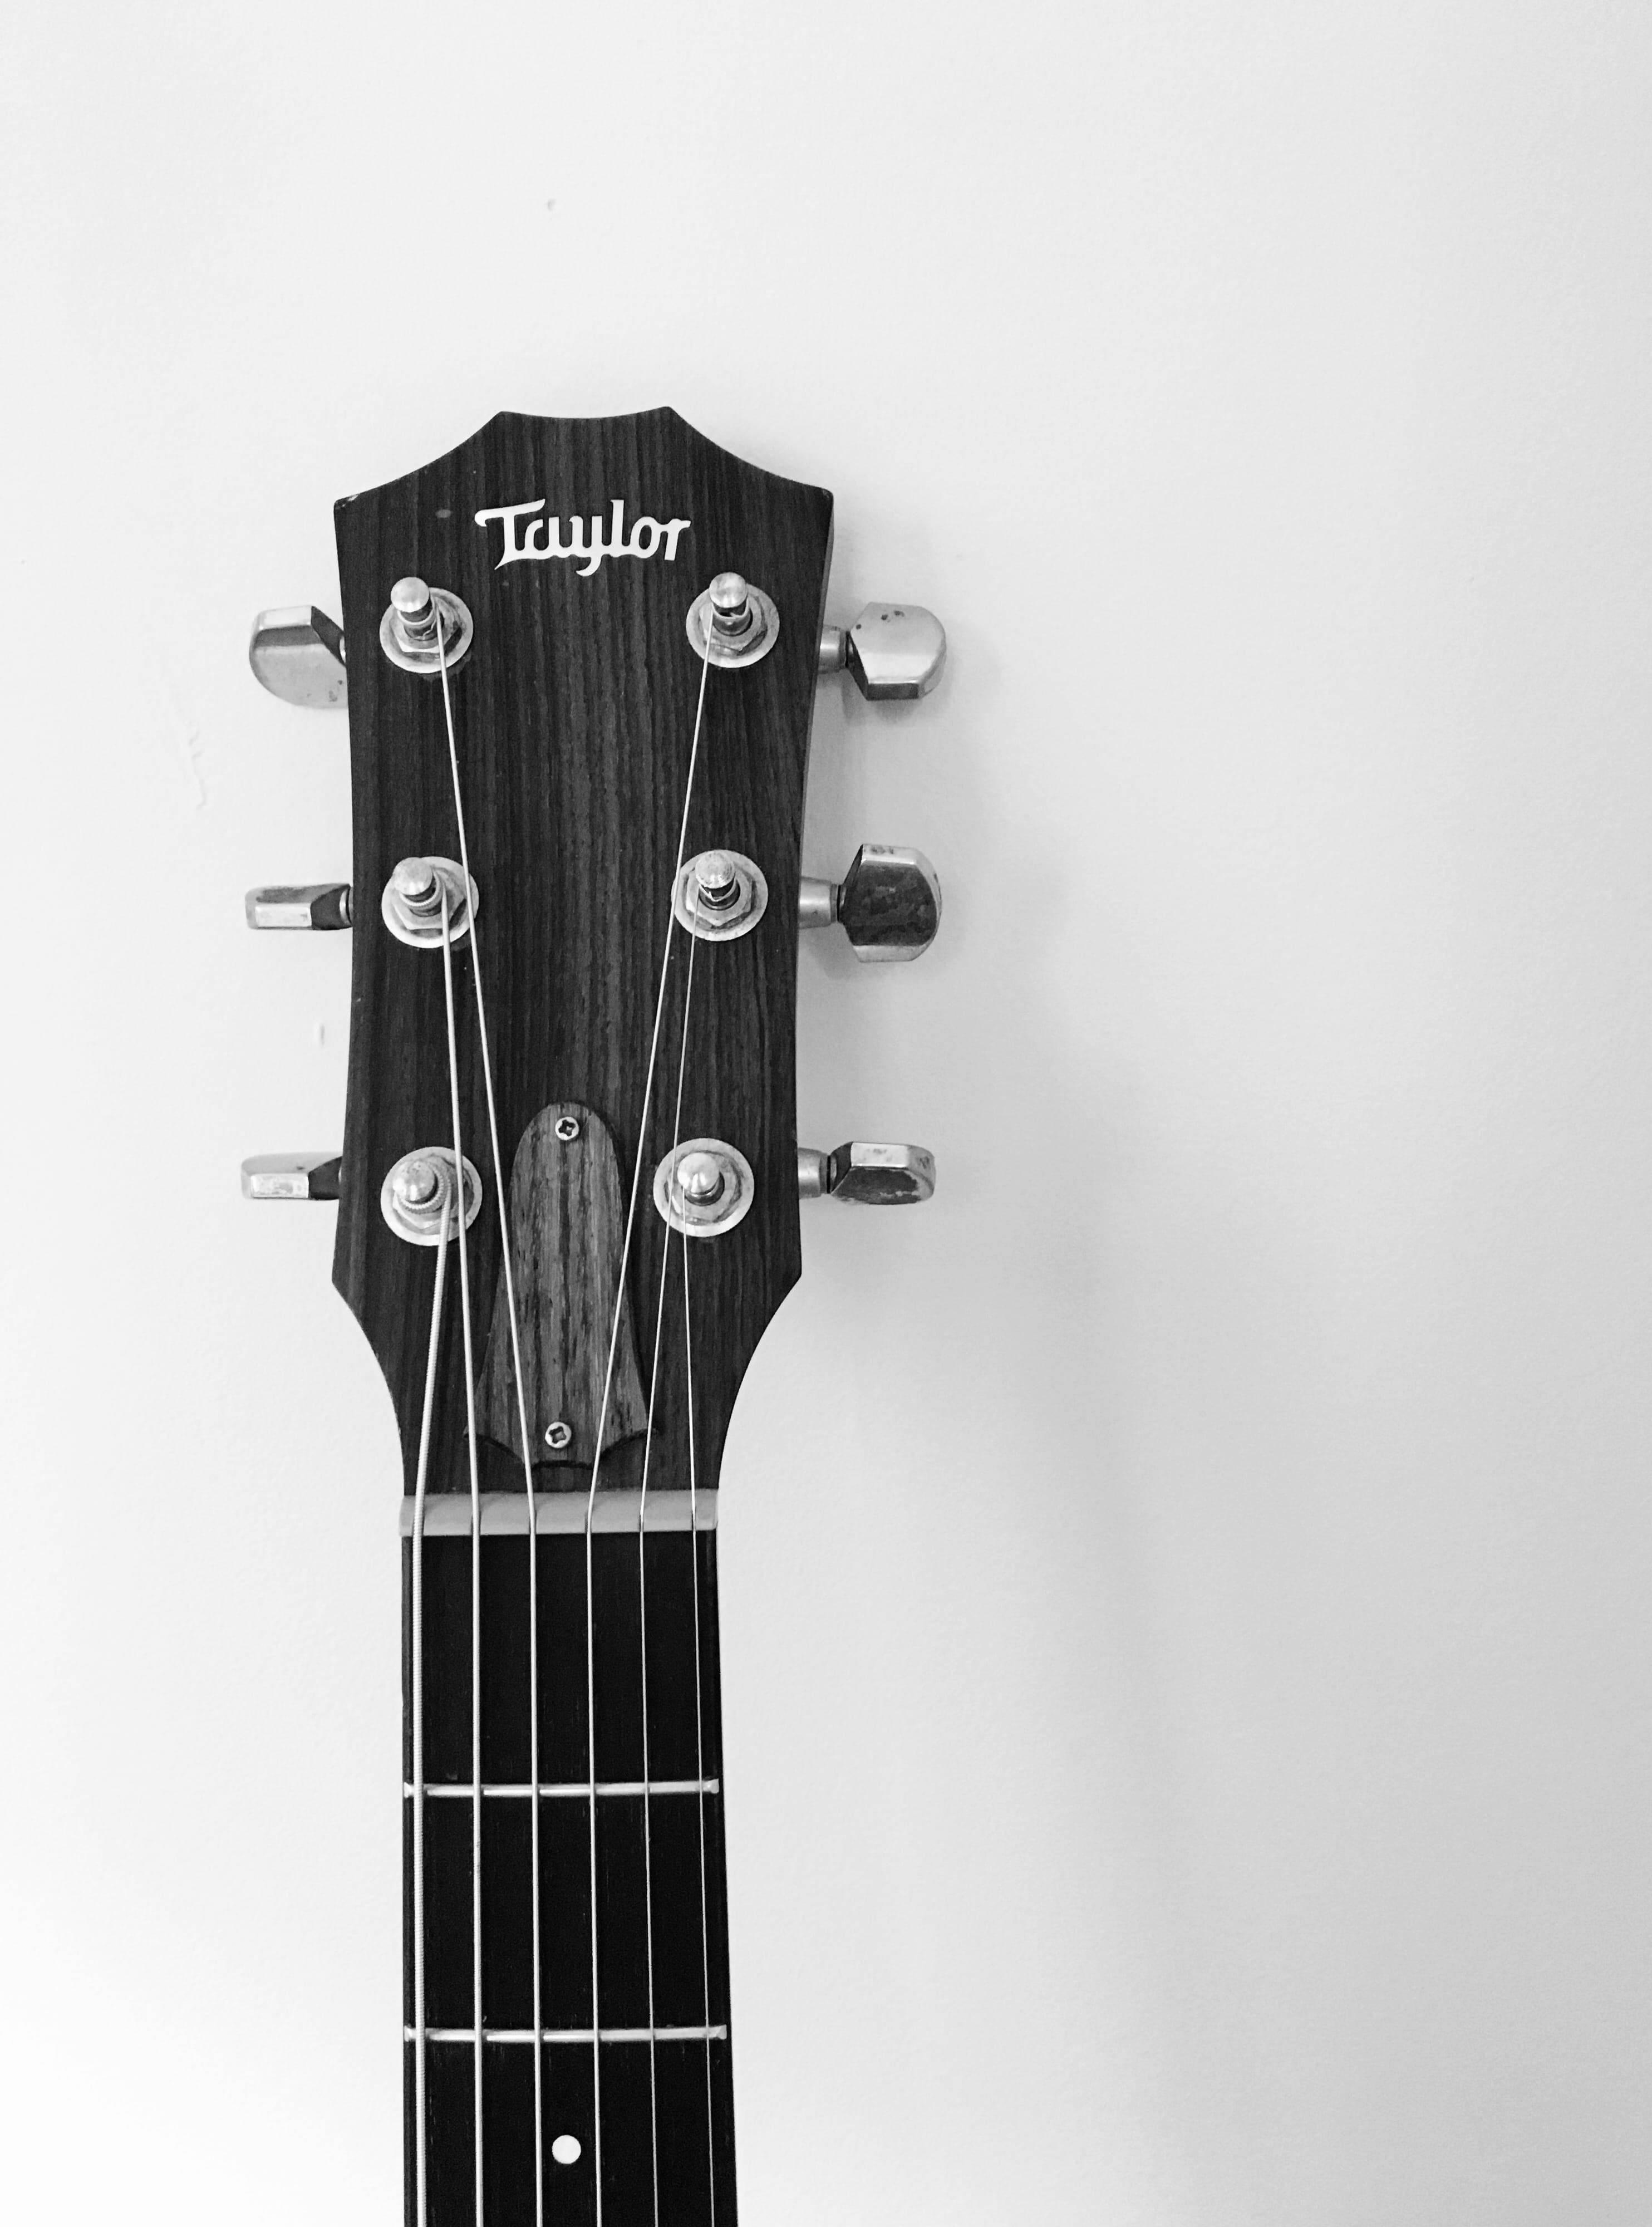 taylor guitar, macro, black and white, musical instruments